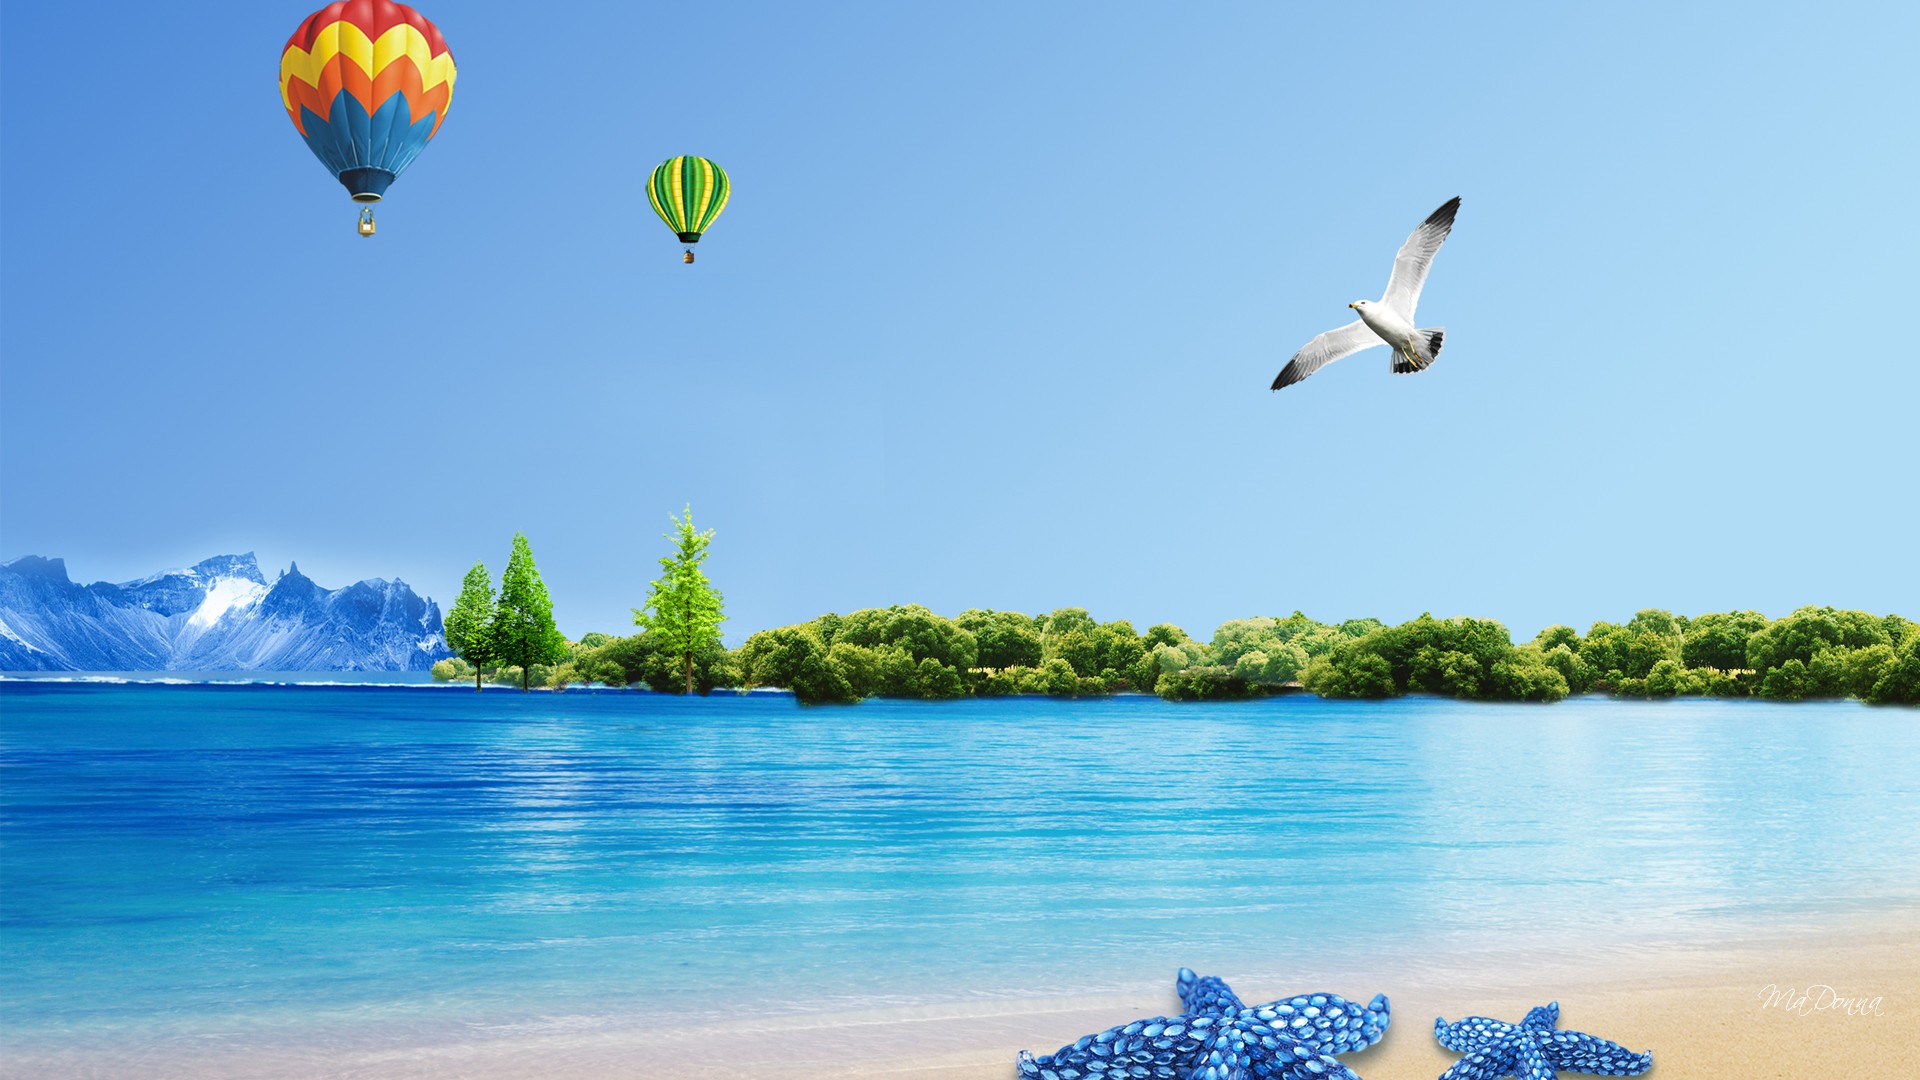 Summer Background Wallpaper Pictures In High Definition Or Widescreen